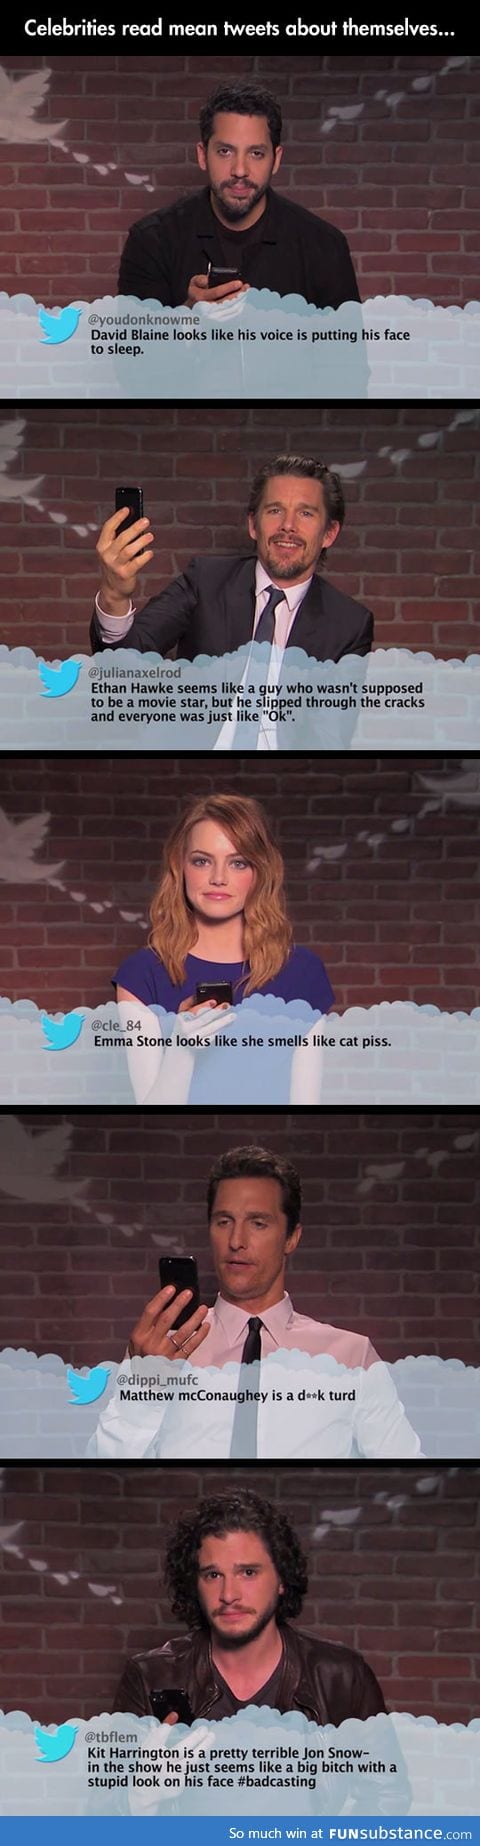 Mean tweets about celebrities